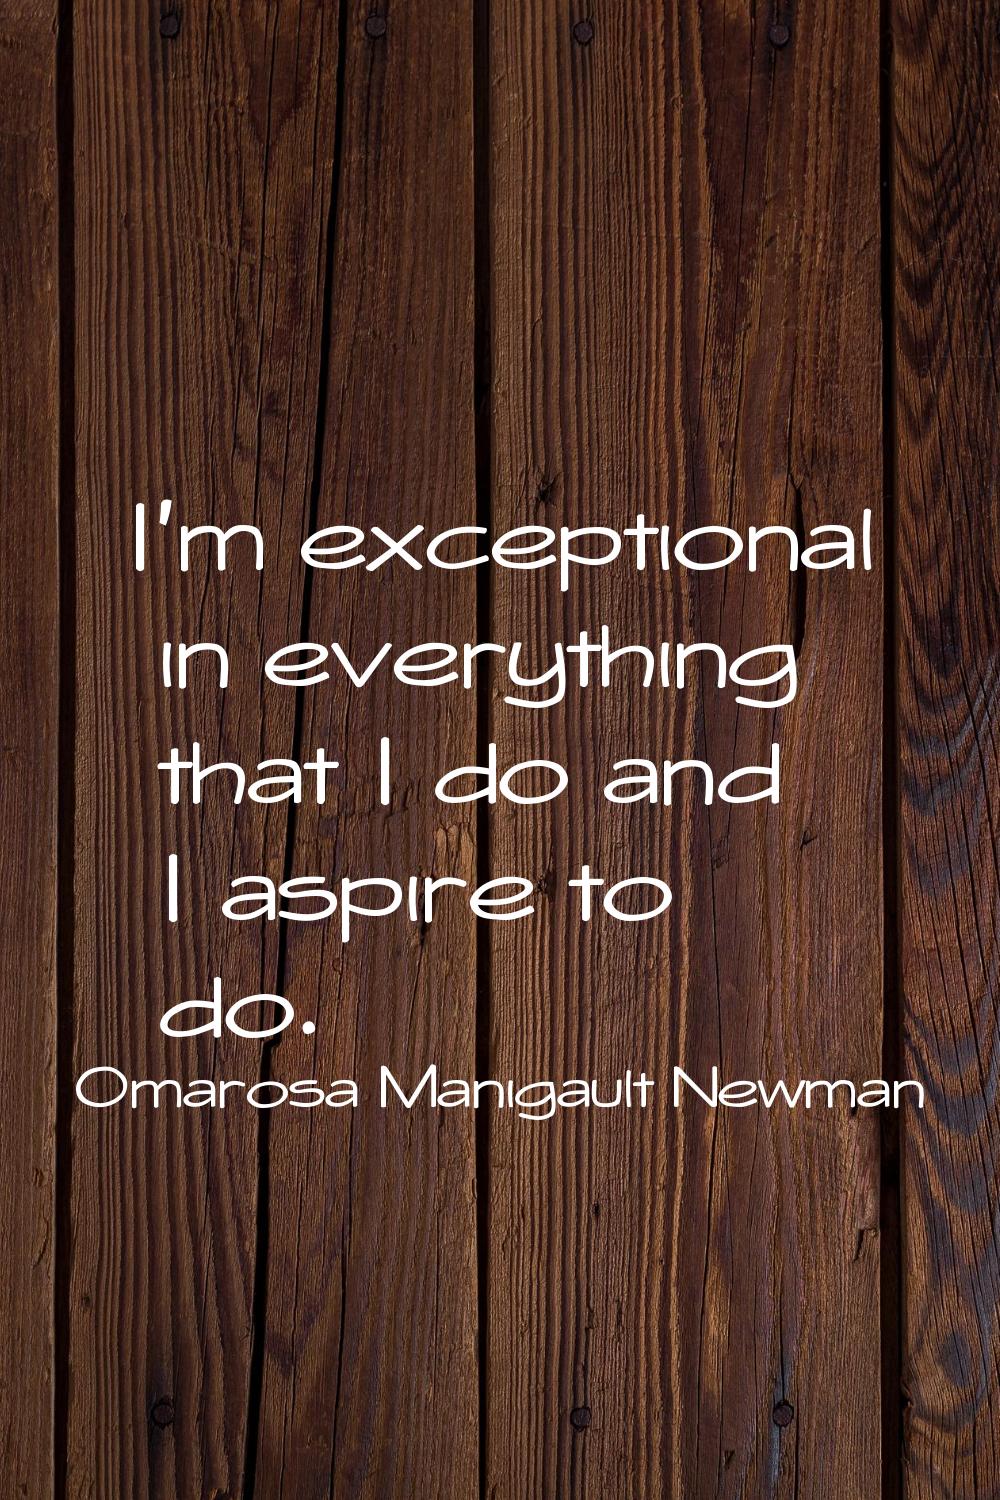 I'm exceptional in everything that I do and I aspire to do.